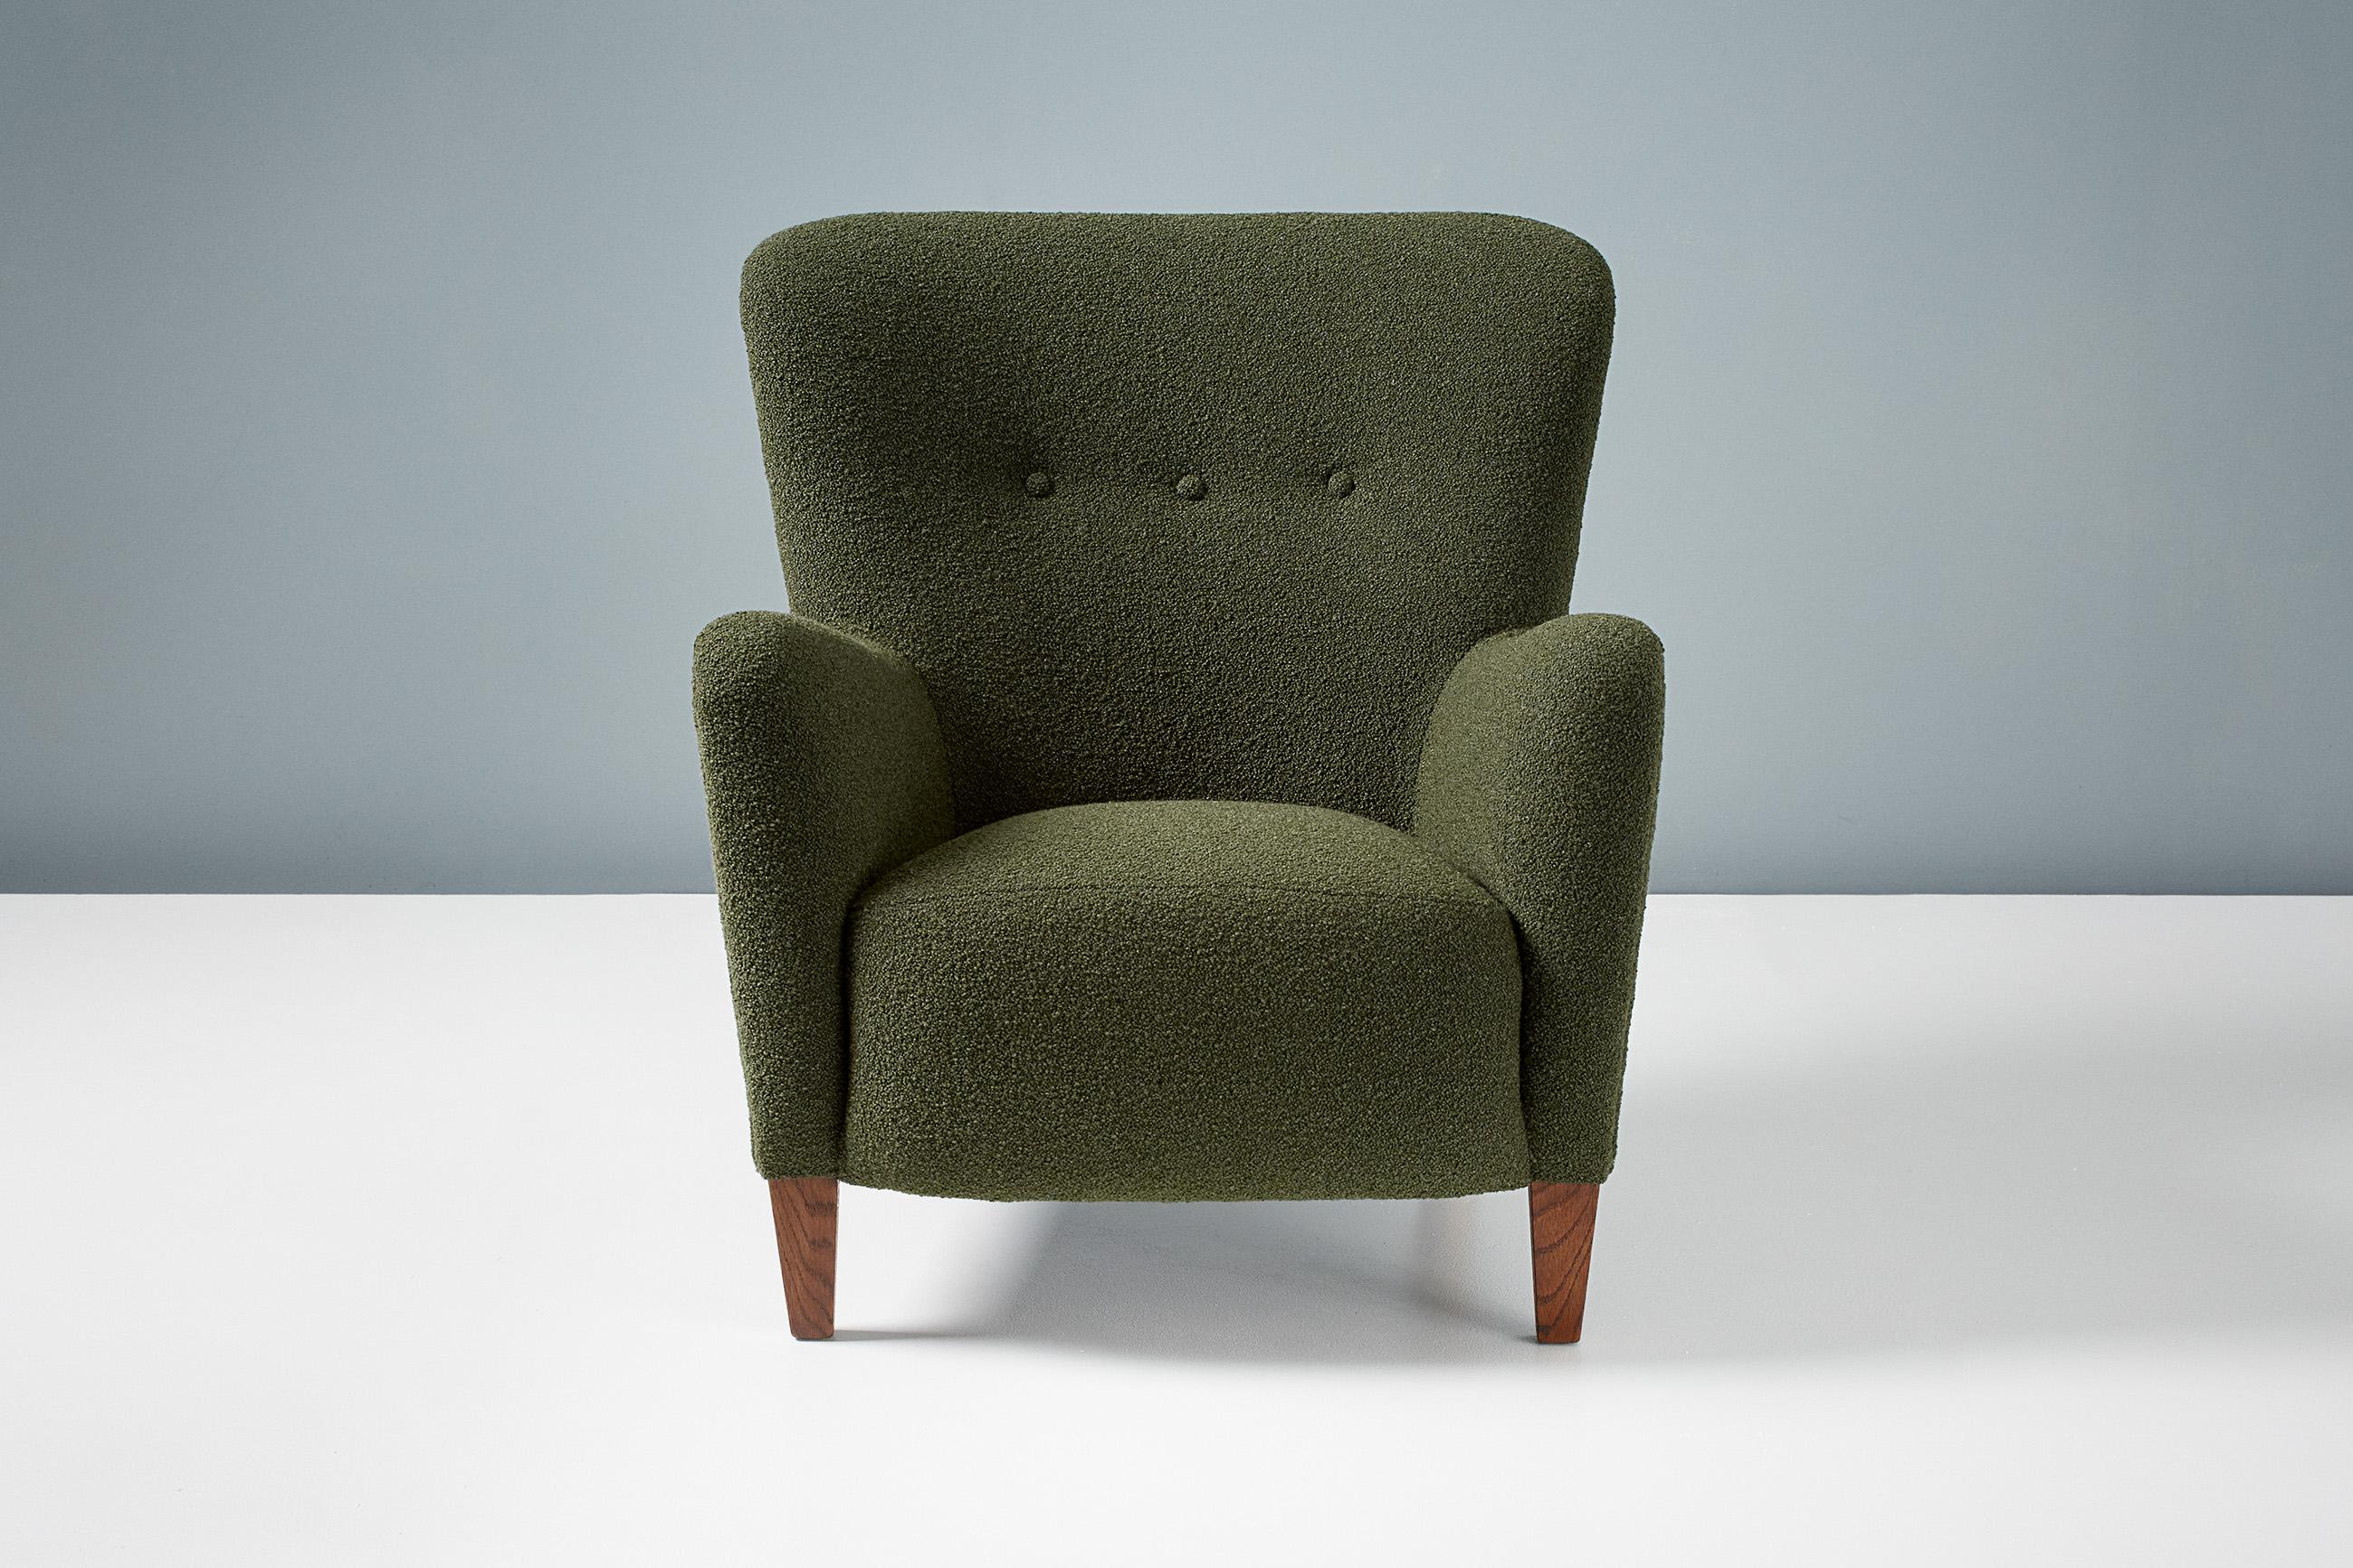 Dagmar design

RYO Armchairs

A pair of custom made lounge chairs developed and produced at our workshops in London using the highest quality materials. These examples are upholstered in luxurious Chase Erwin boucle green fabric and feature fumed